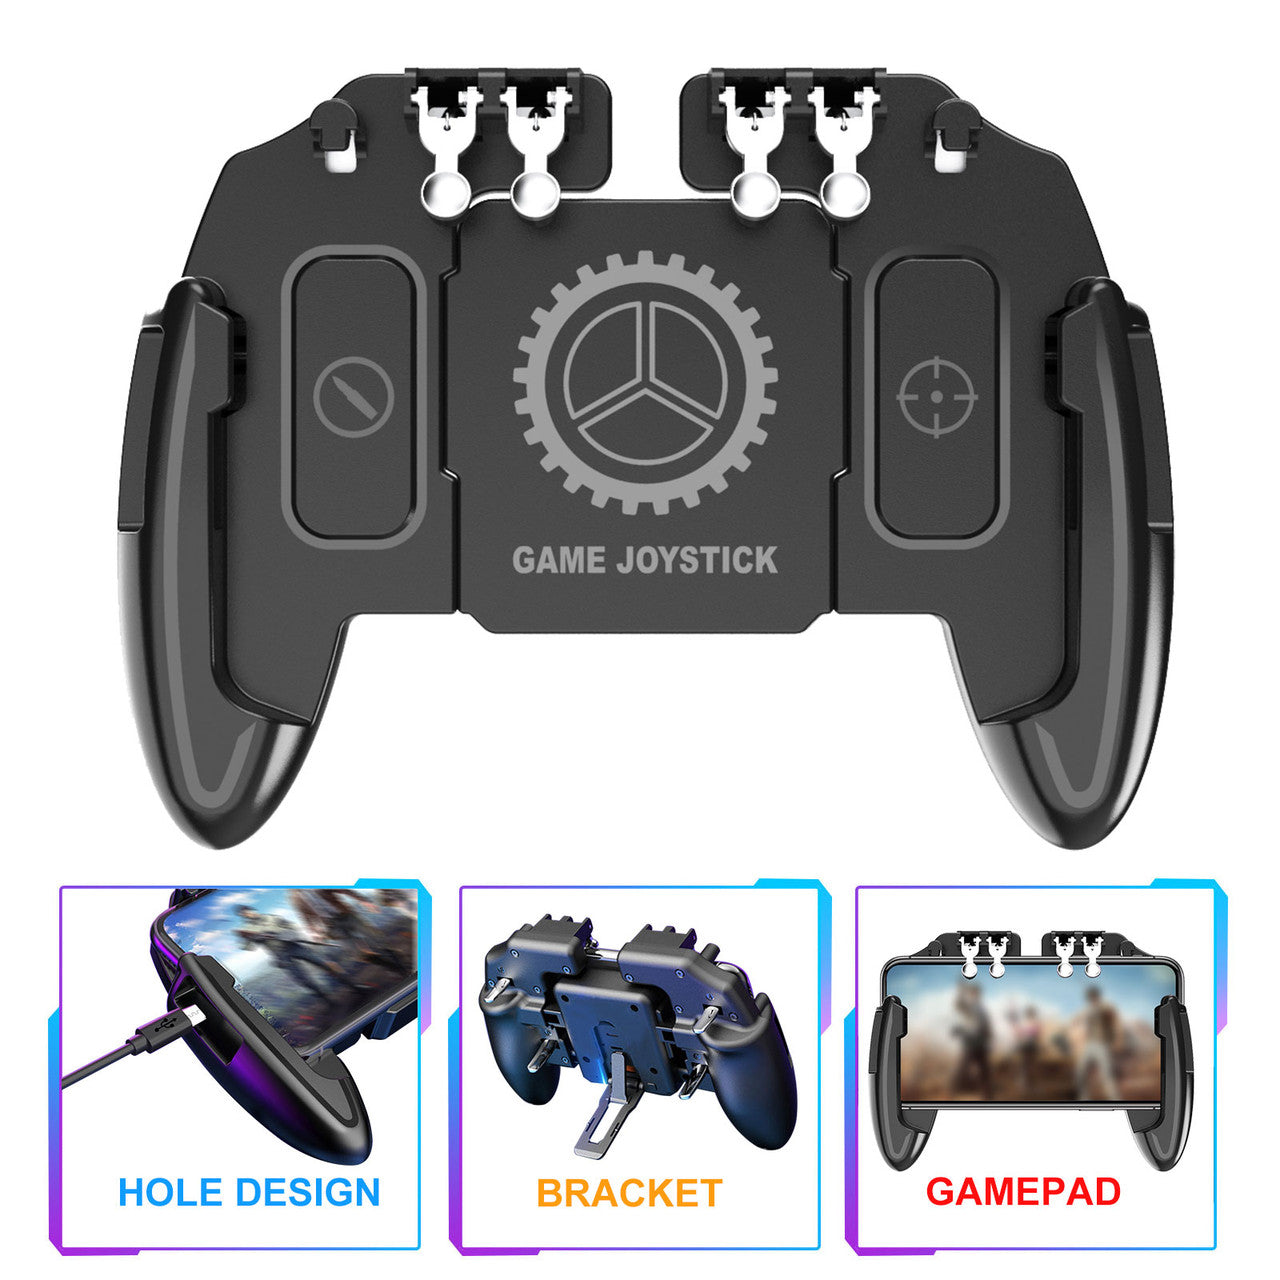 Mobile Phone Game Controller Trigger Gamepad L1R1 L2R2 Joystick for PUBG Call of Duty, Aim Shoot Phone Game Controller, Mobile Gamepad for iPhone Samsung Game Accessories, 6 Finger Operation